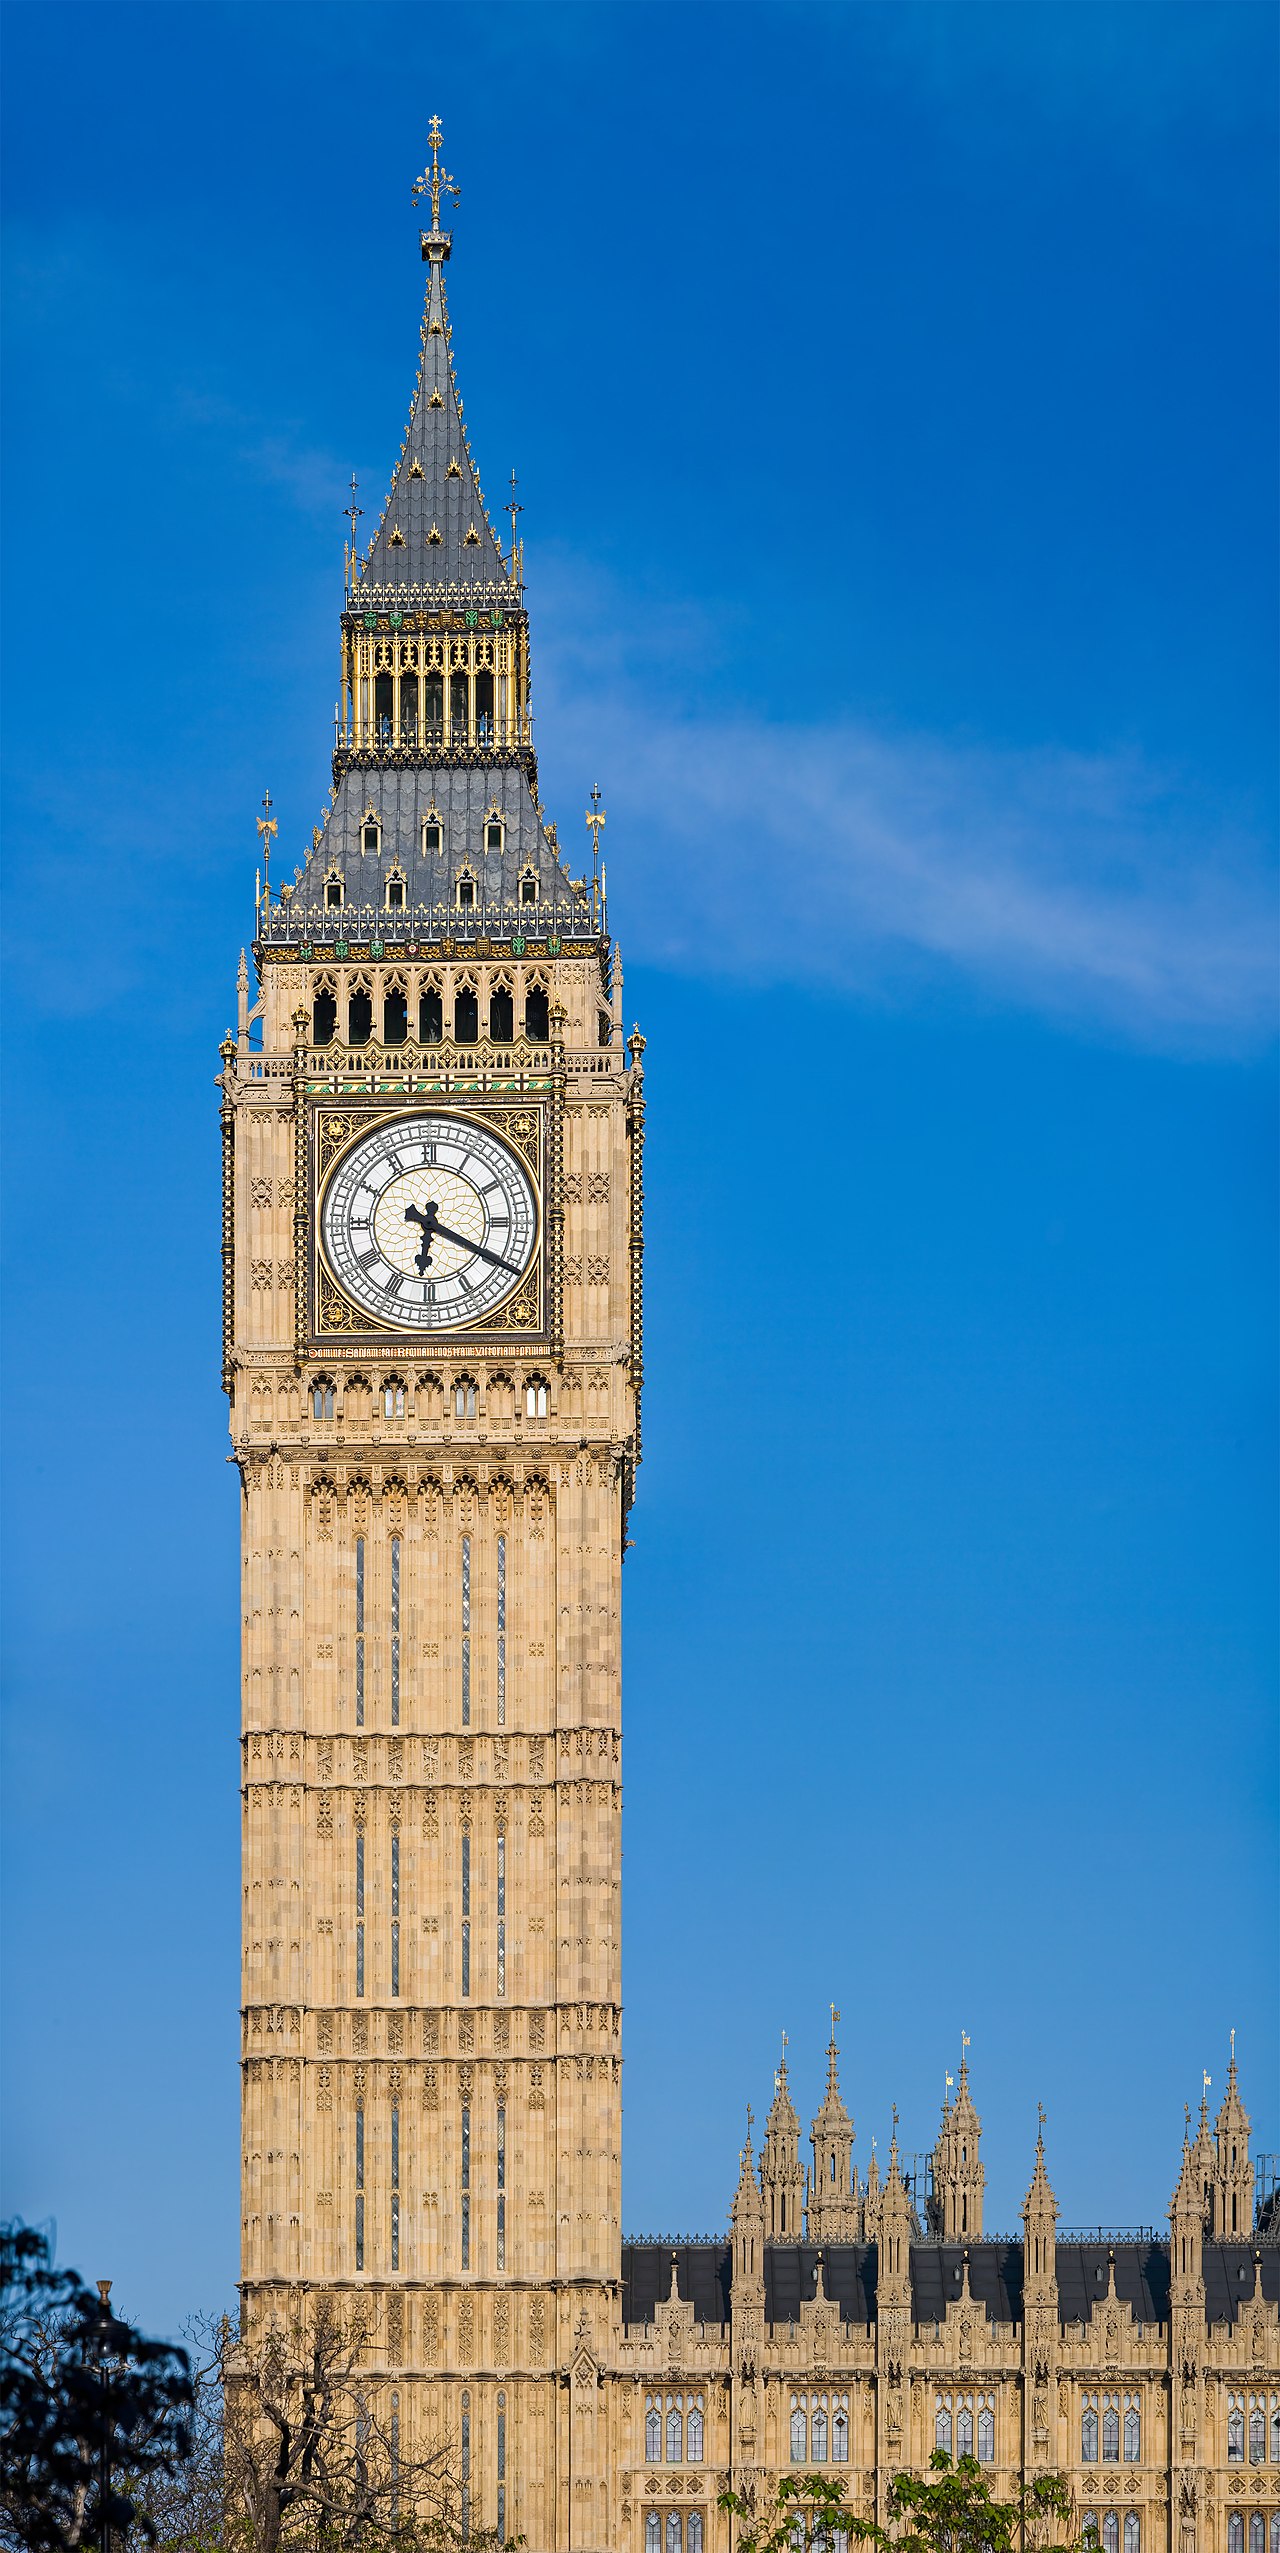 Clock_Tower_-_Palace_of_Westminster,_London_-_May_2007.jpg